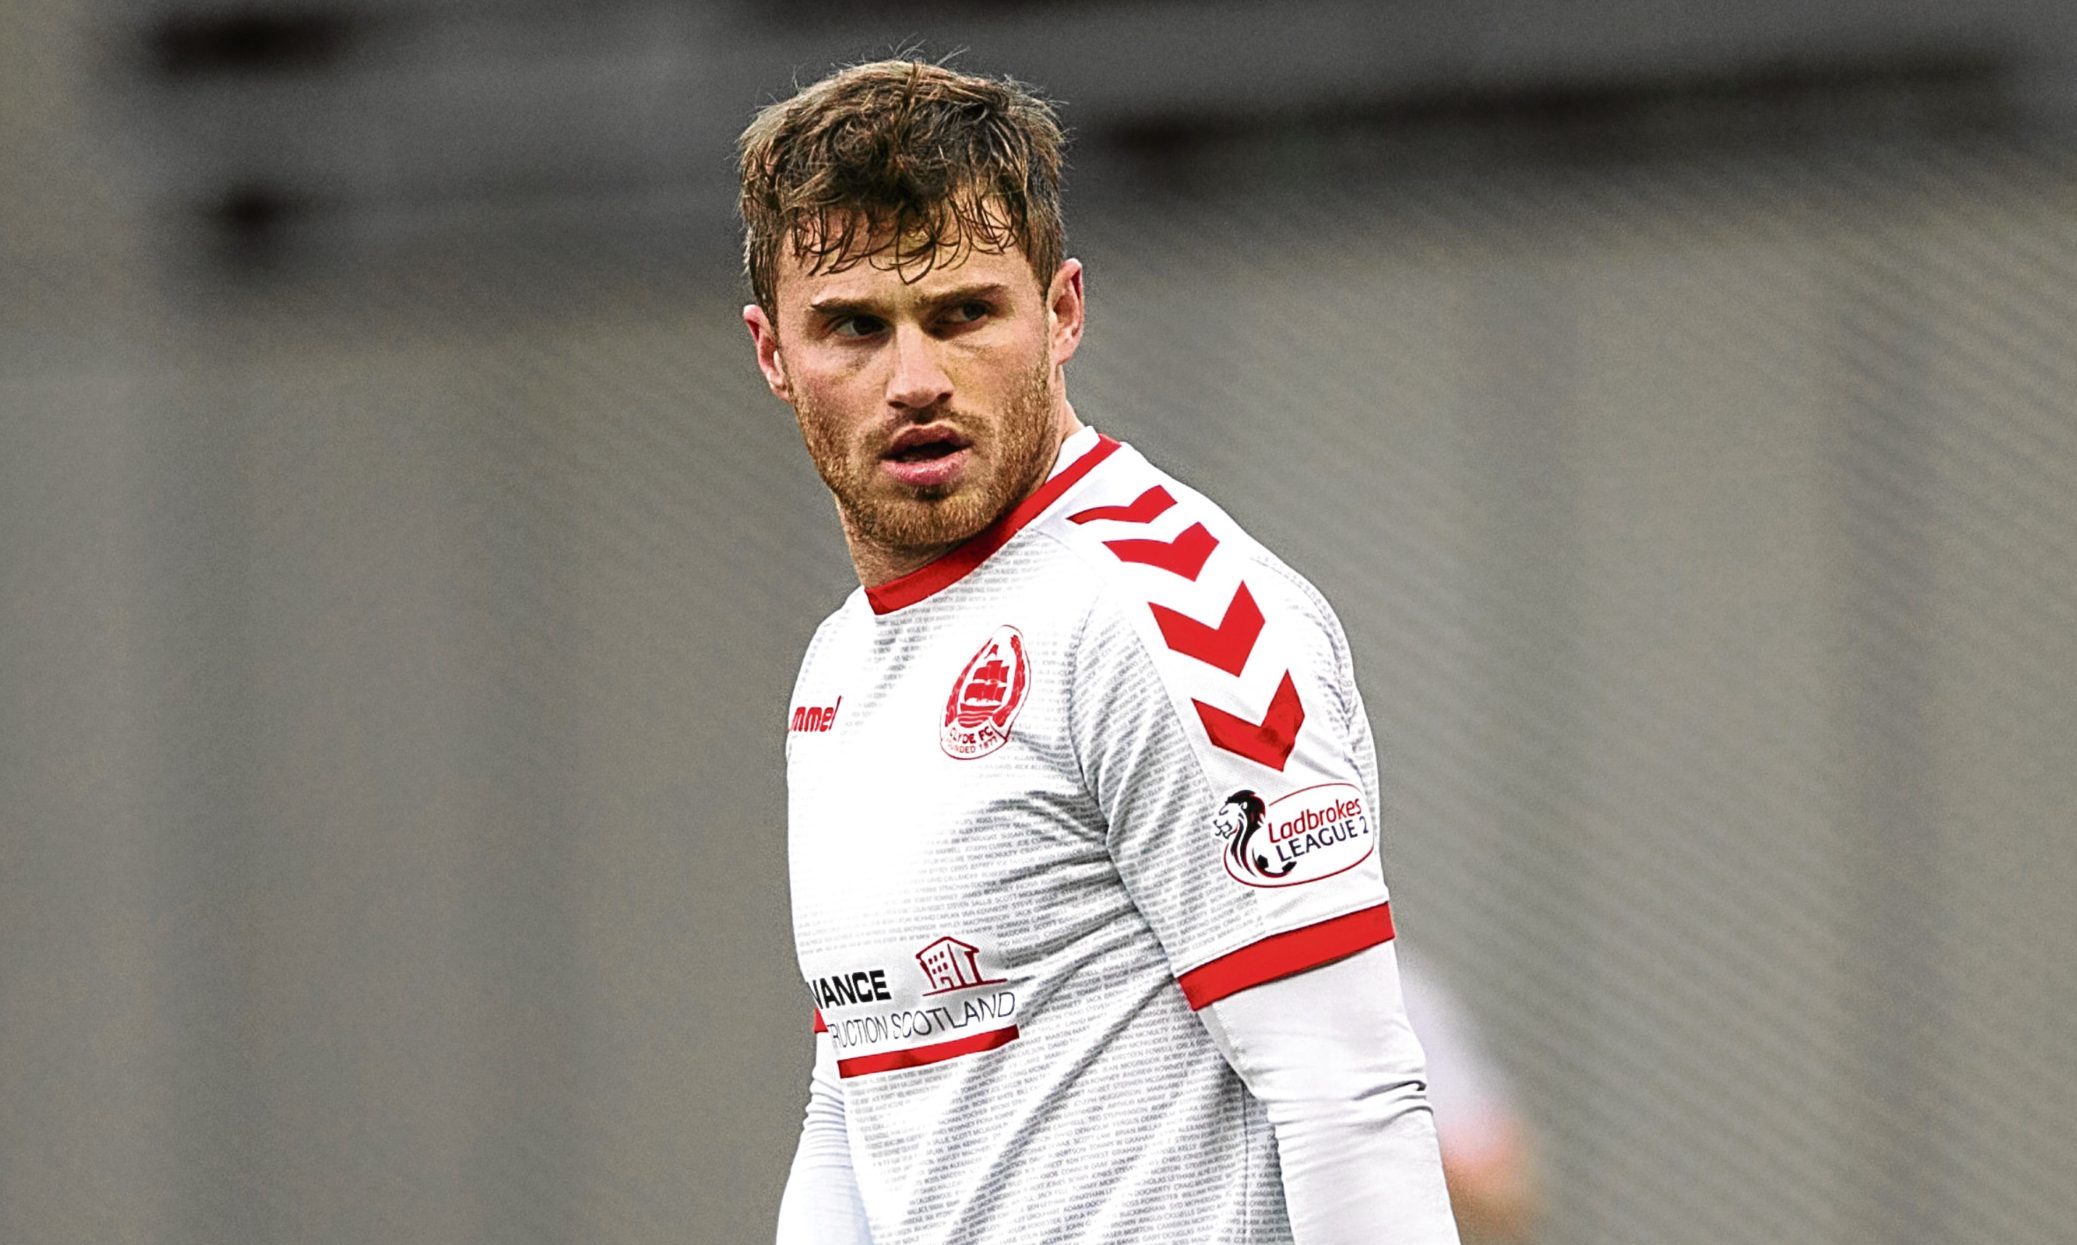 David Goodwillie playing for Clyde (Andrew Cawley / DC Thomson)